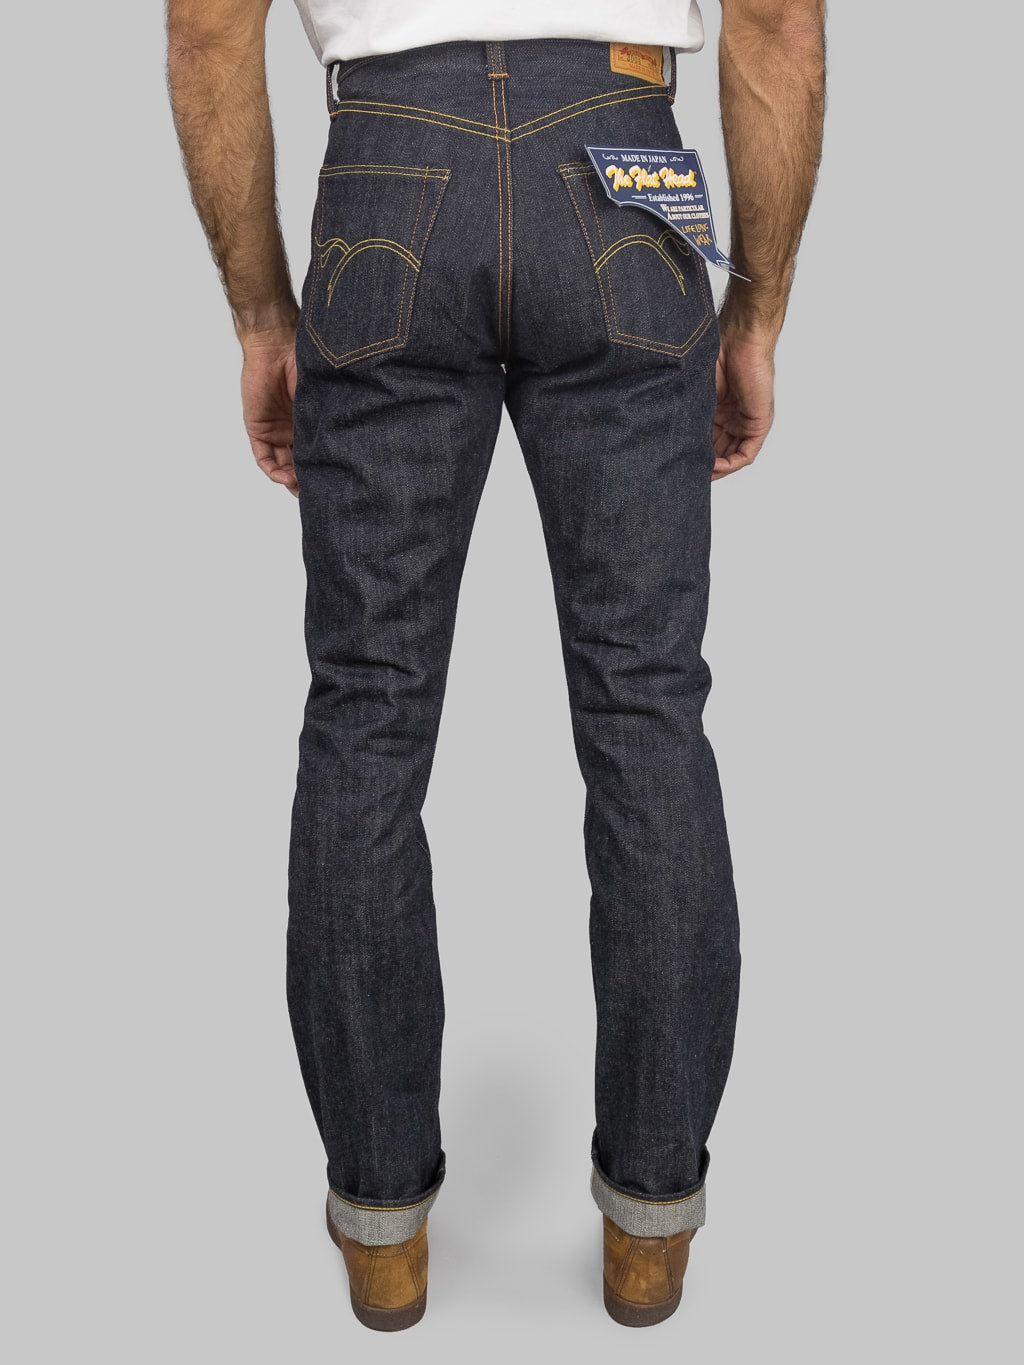 The Flat Head 3004 Regular Straight Jeans back fit